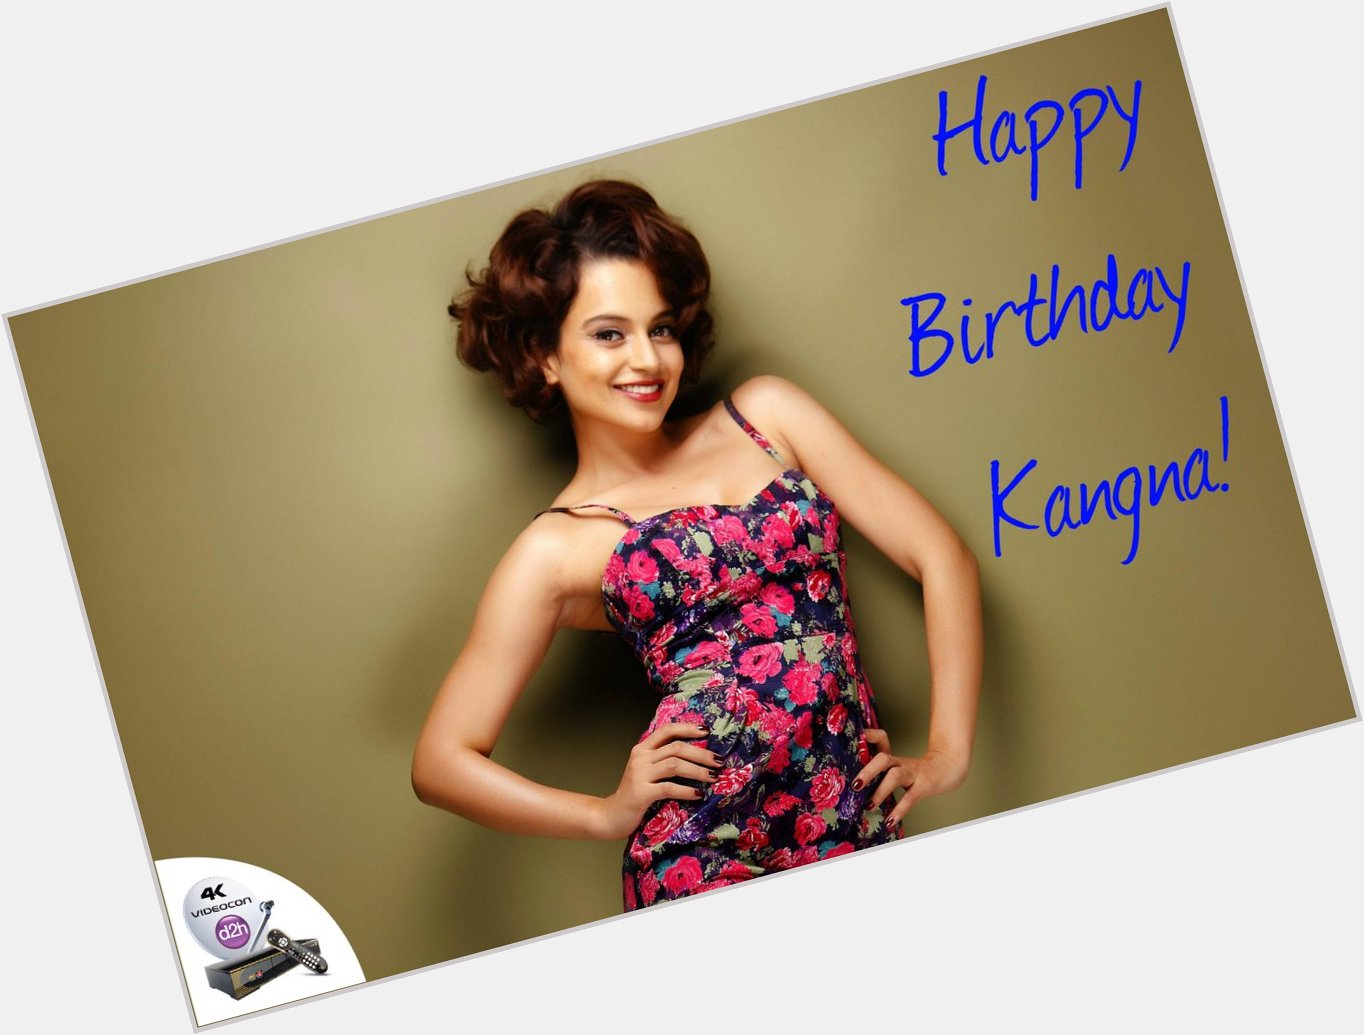 Happy Birthday to one of the most acclaimed actresses in Hindi Cinema, Kangna Ranaut! 